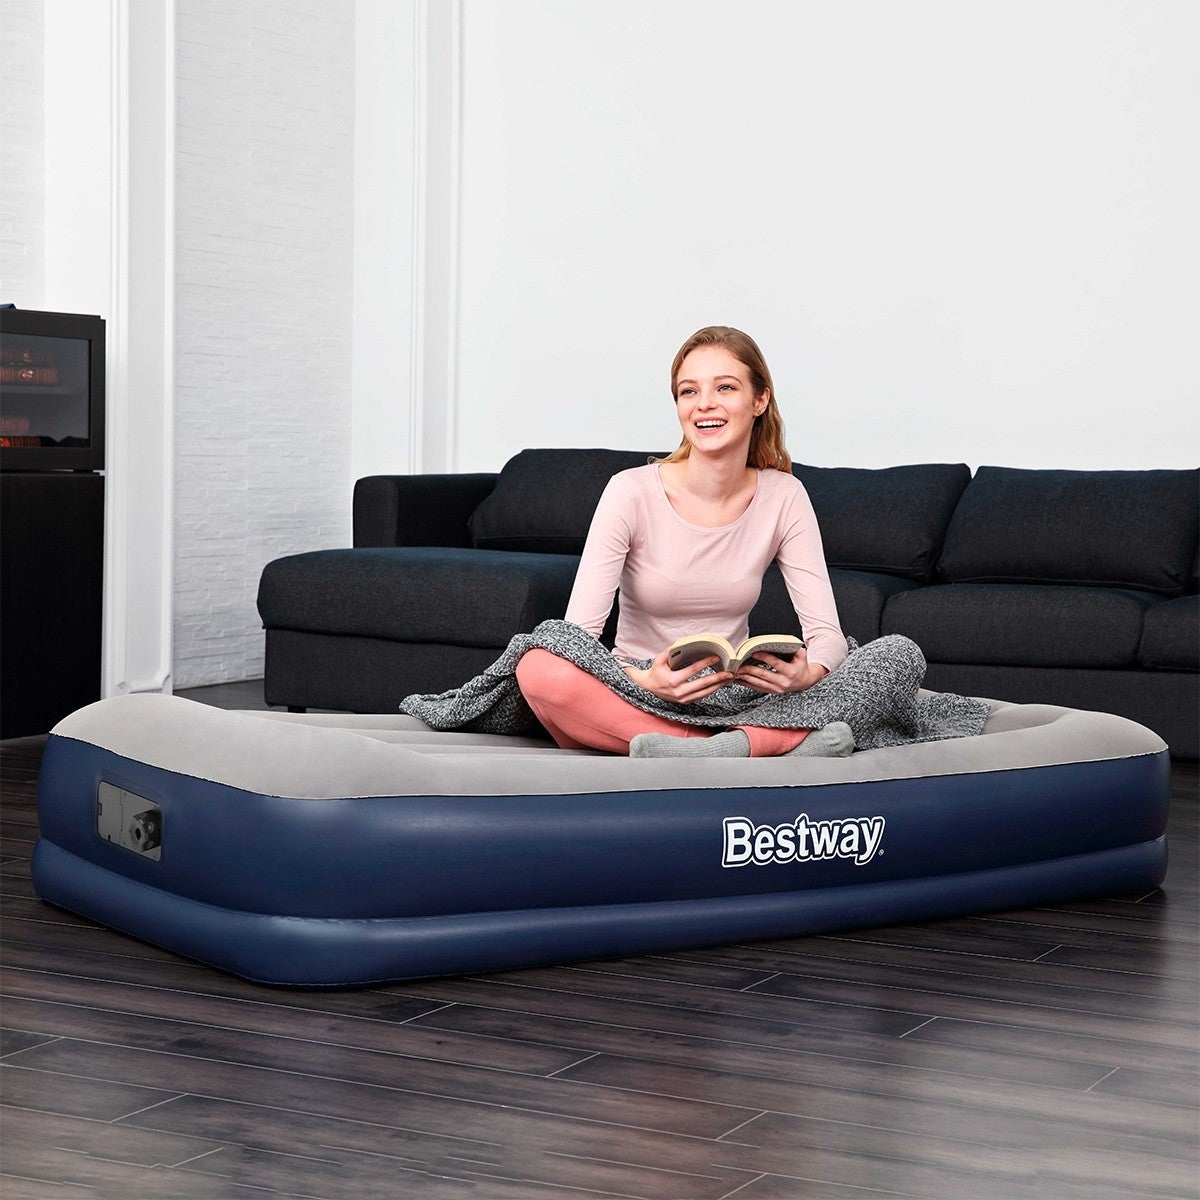 Bestway Inflatable Bed Single Size Air Mattress with Built-in Pump and Pillow | Buy Inflatable 